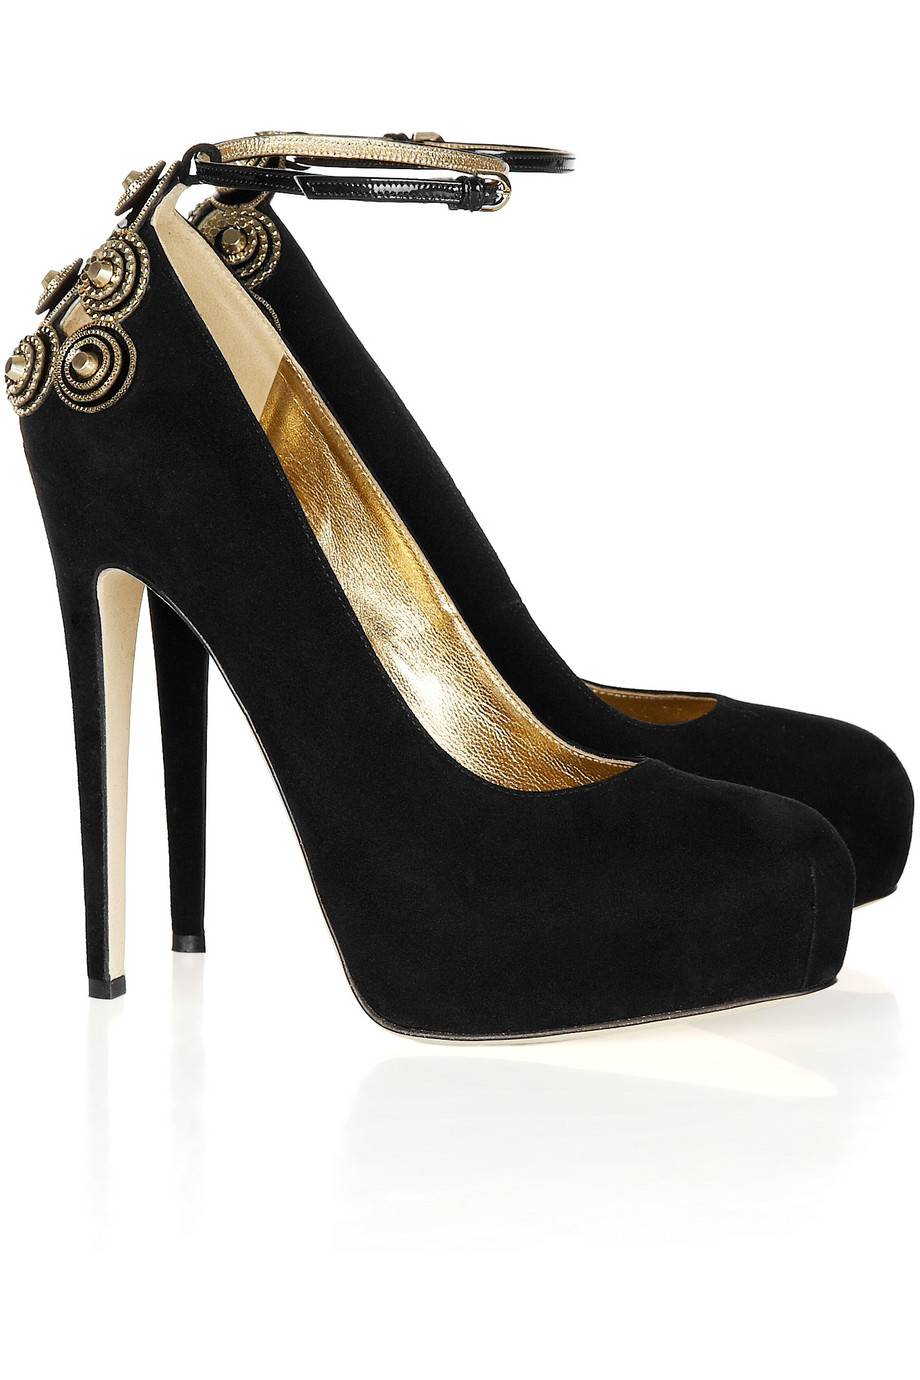 Brian atwood Zenith Chain and Studembellished Suede Pumps in Black | Lyst